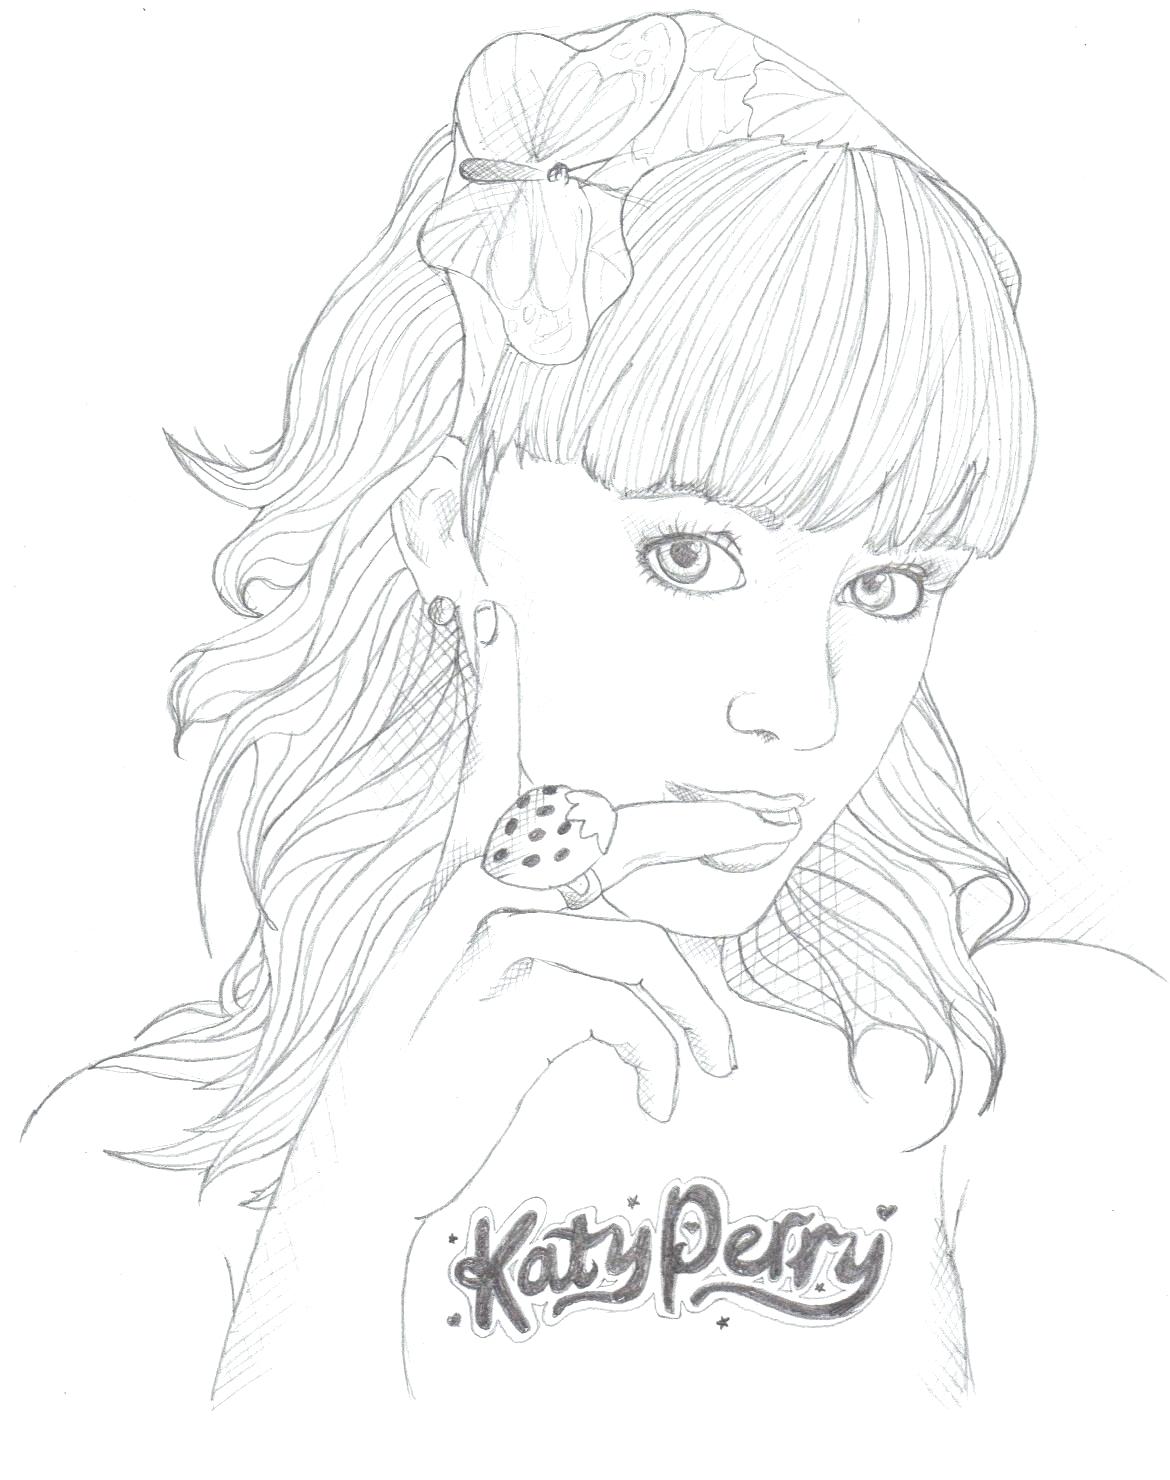 Katy Perry Coloring Sheets Coloring Pages